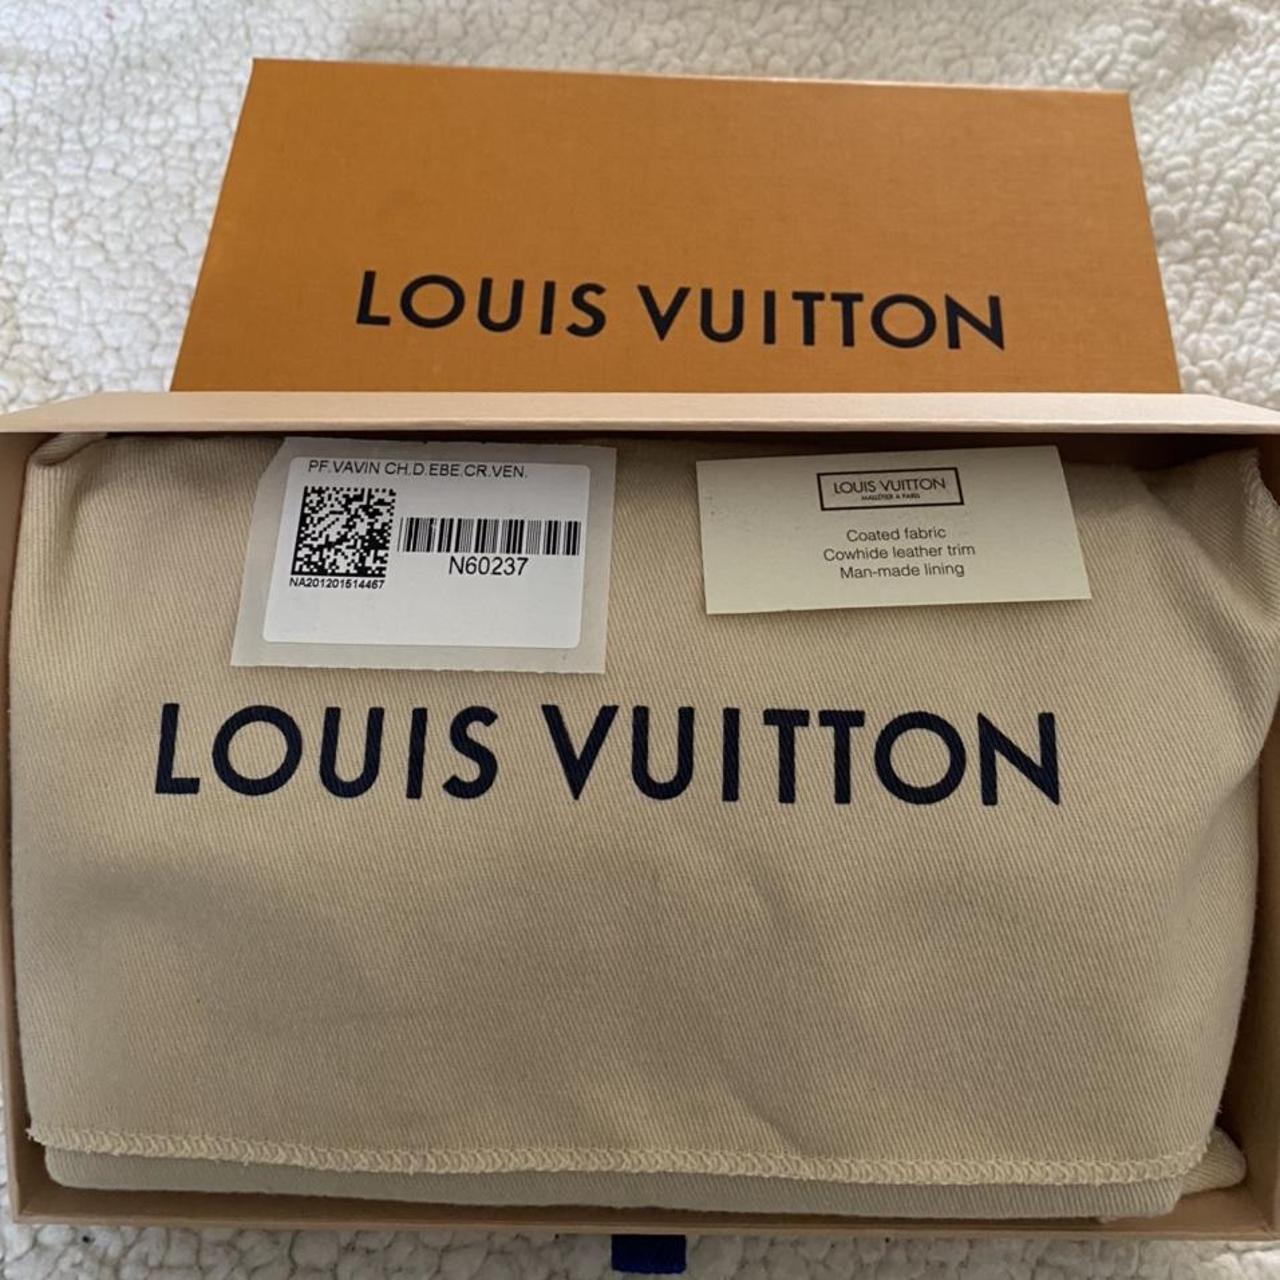 SELLING SLIGHTLY USED LOUIS VUITTON - VAVIN CHAIN